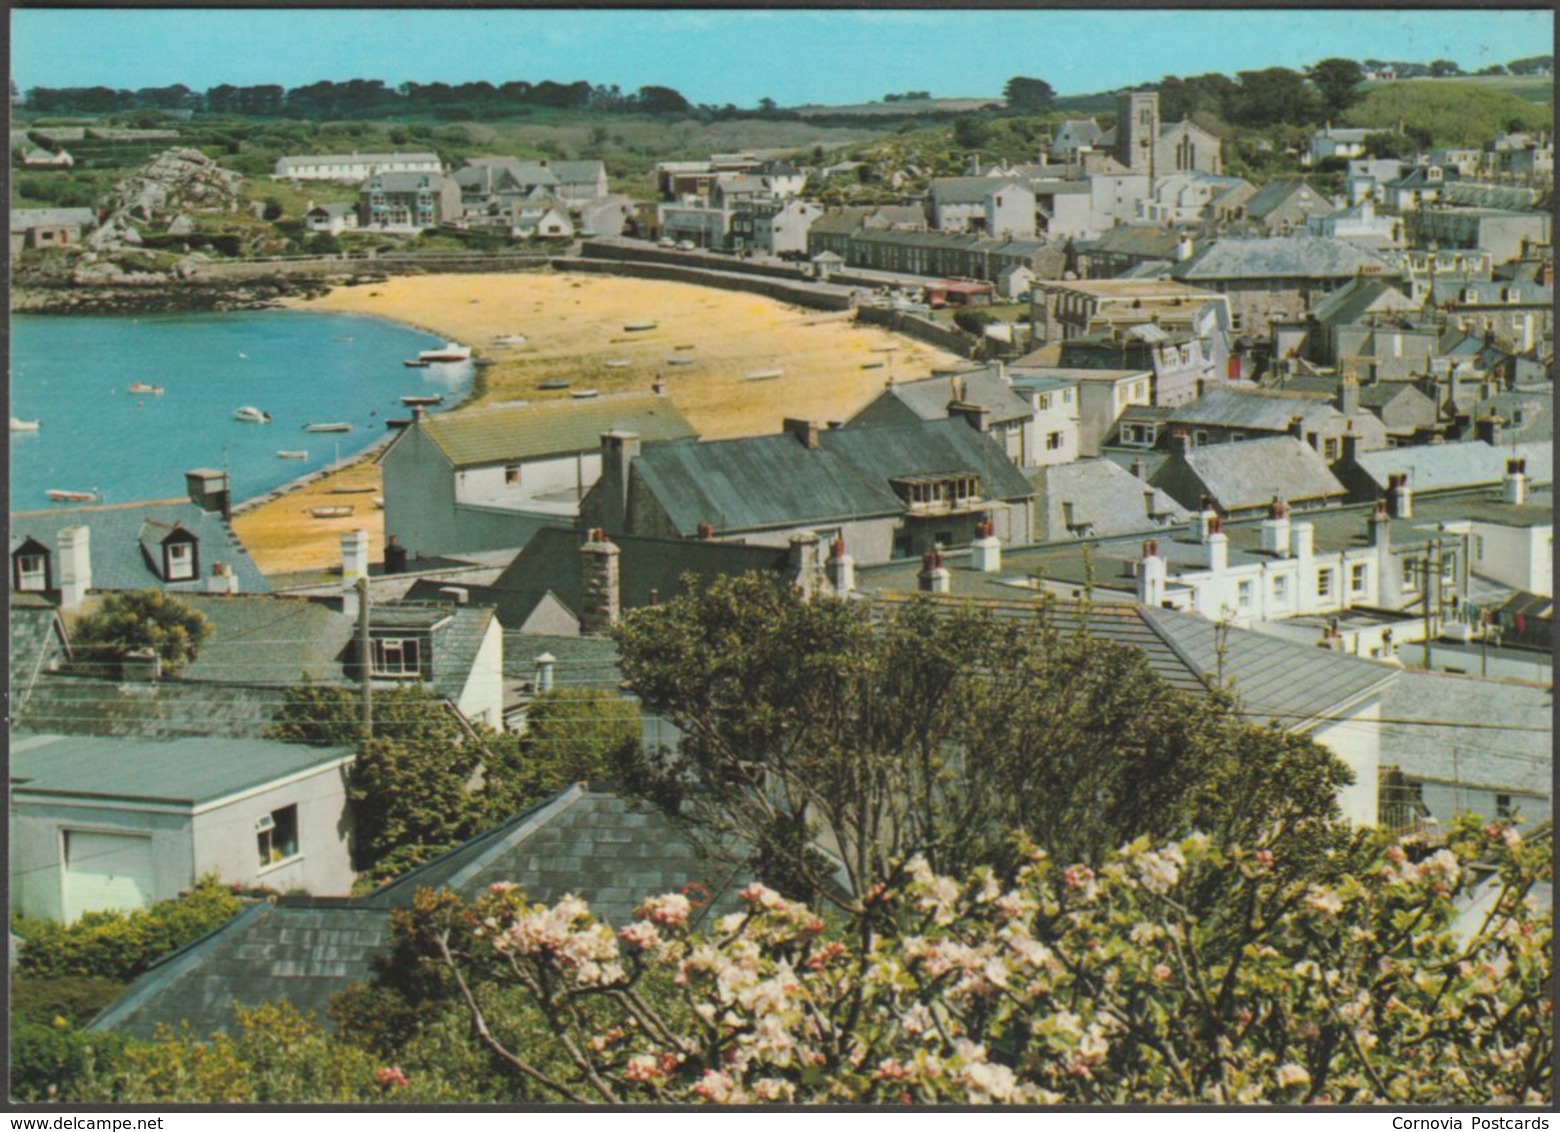 Hugh Town And The Harbour, St Mary's, Isles Of Scilly, C.1980s - Beric Tempest Postcard - Scilly Isles